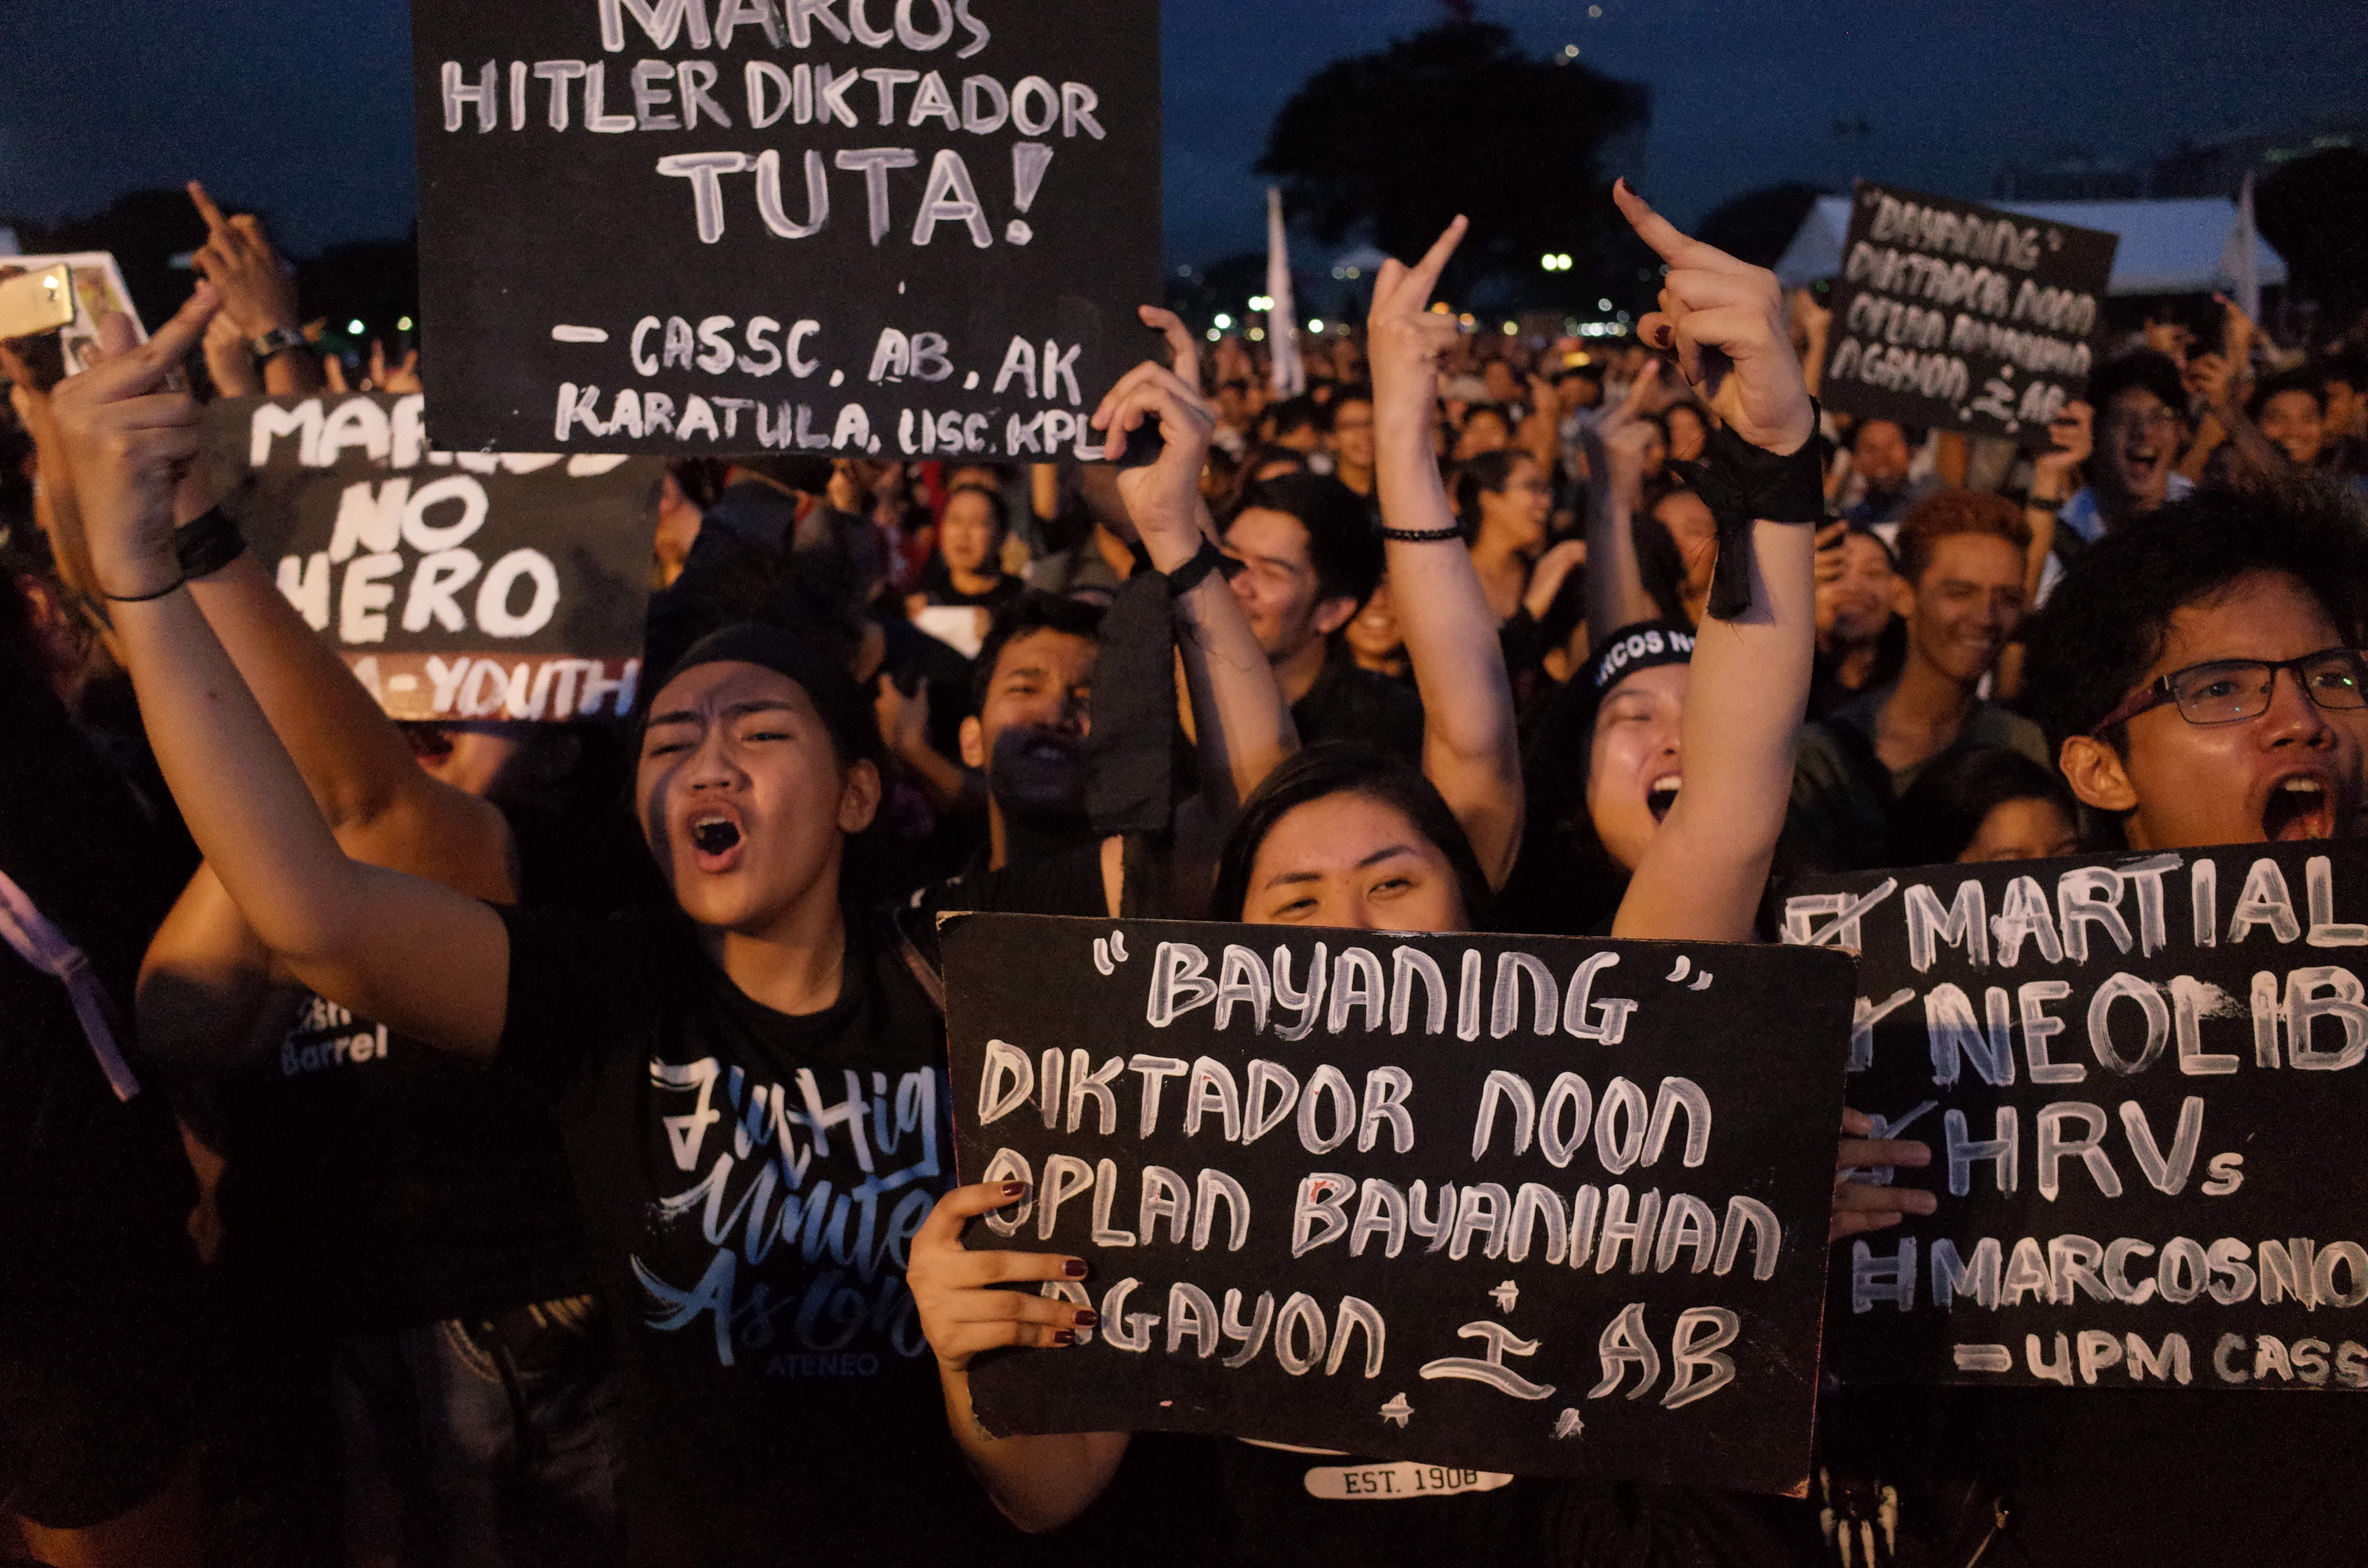 Filipino activists holding placards react to a speaker